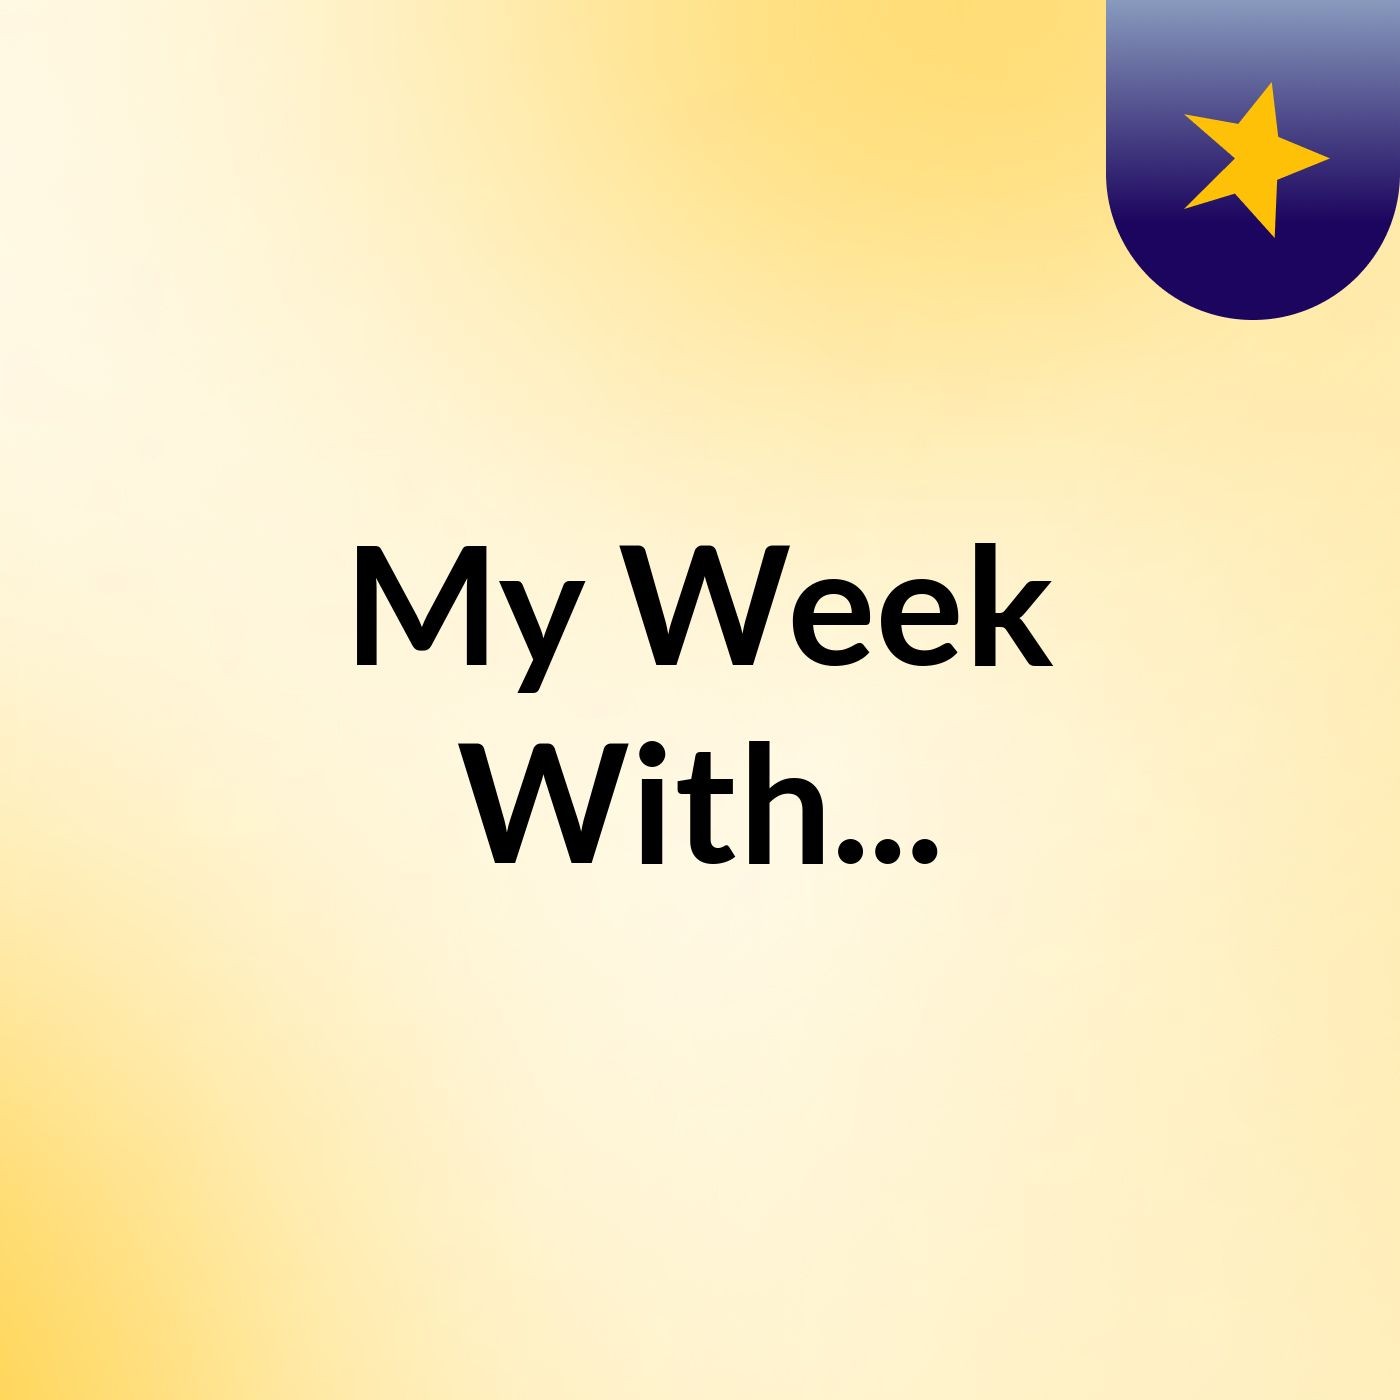 My Week With...